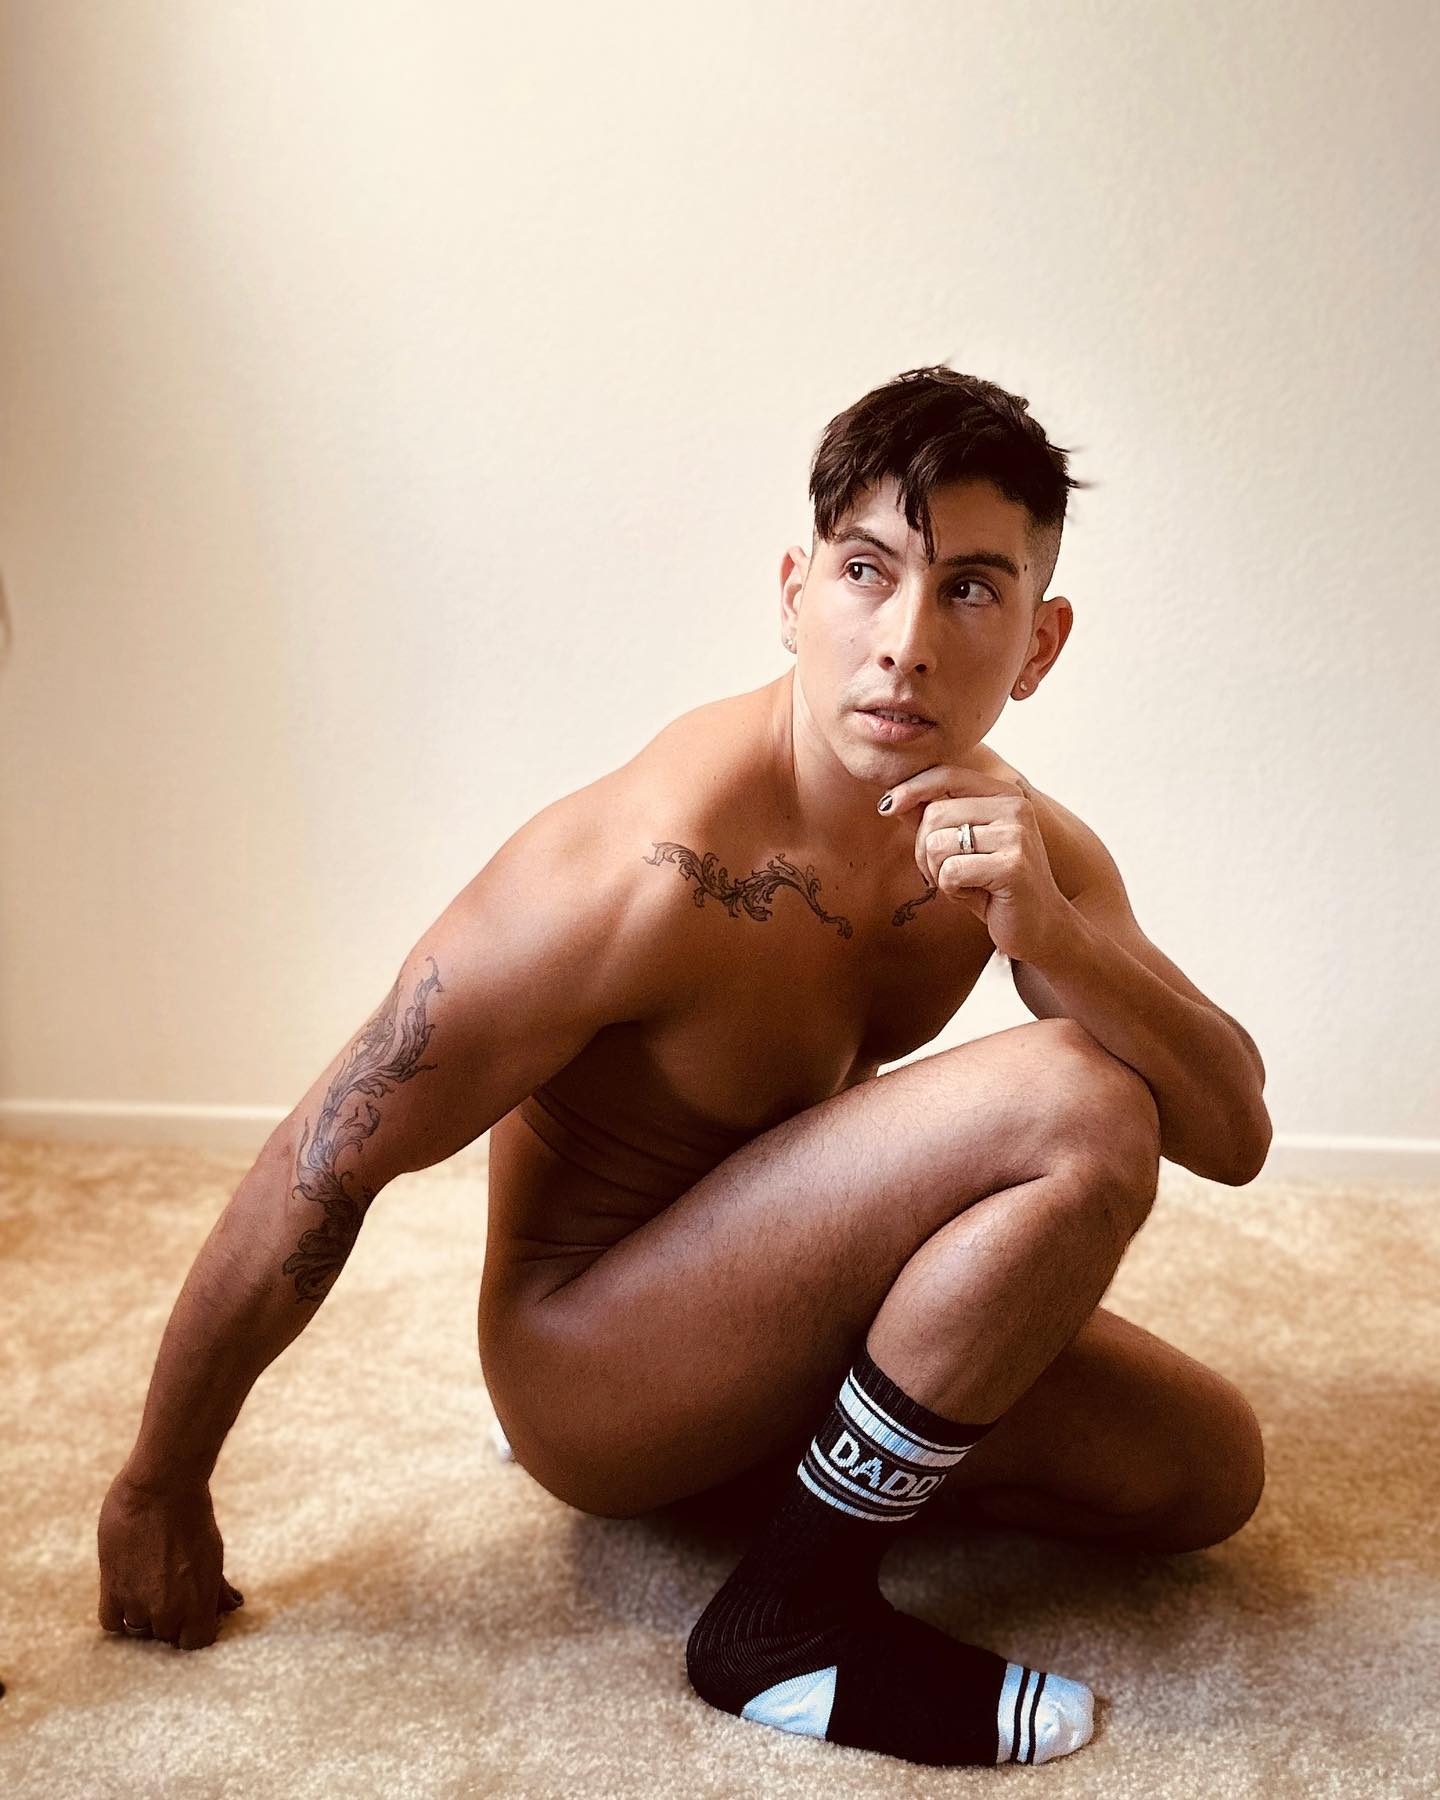 What’s something you’ve always wanted to try? I found that pushing myself out of my comfort zone has led to the most fulfilling experiences of my life. I’ve met the most amazing people and seen the most incredible things because I took a risk. All those experiences shaped who I am today, and I wouldn’t trade it for anything.

#maleformandbeauty #malebudoir #latinomen #sundayinspiration #daddysocks